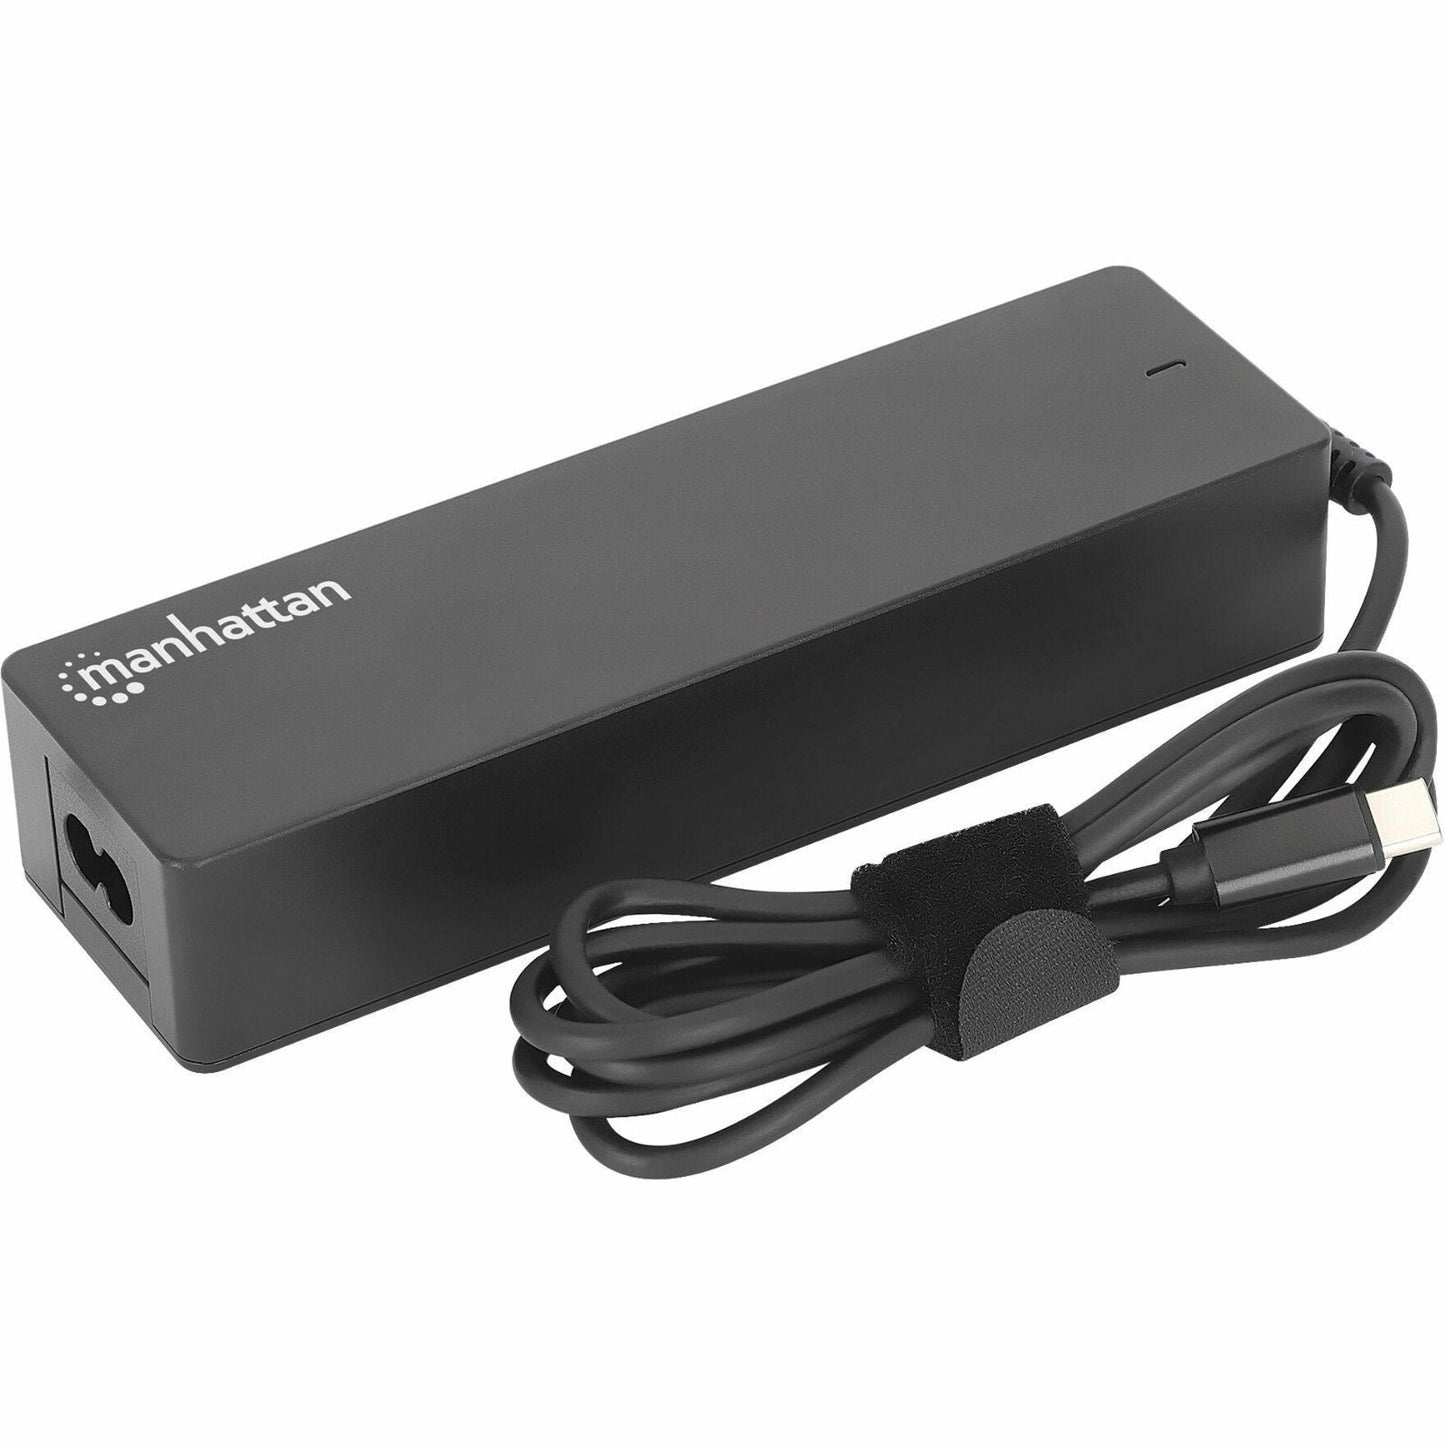 Manhattan USB-C Power Delivery Laptop Charger - 100 W